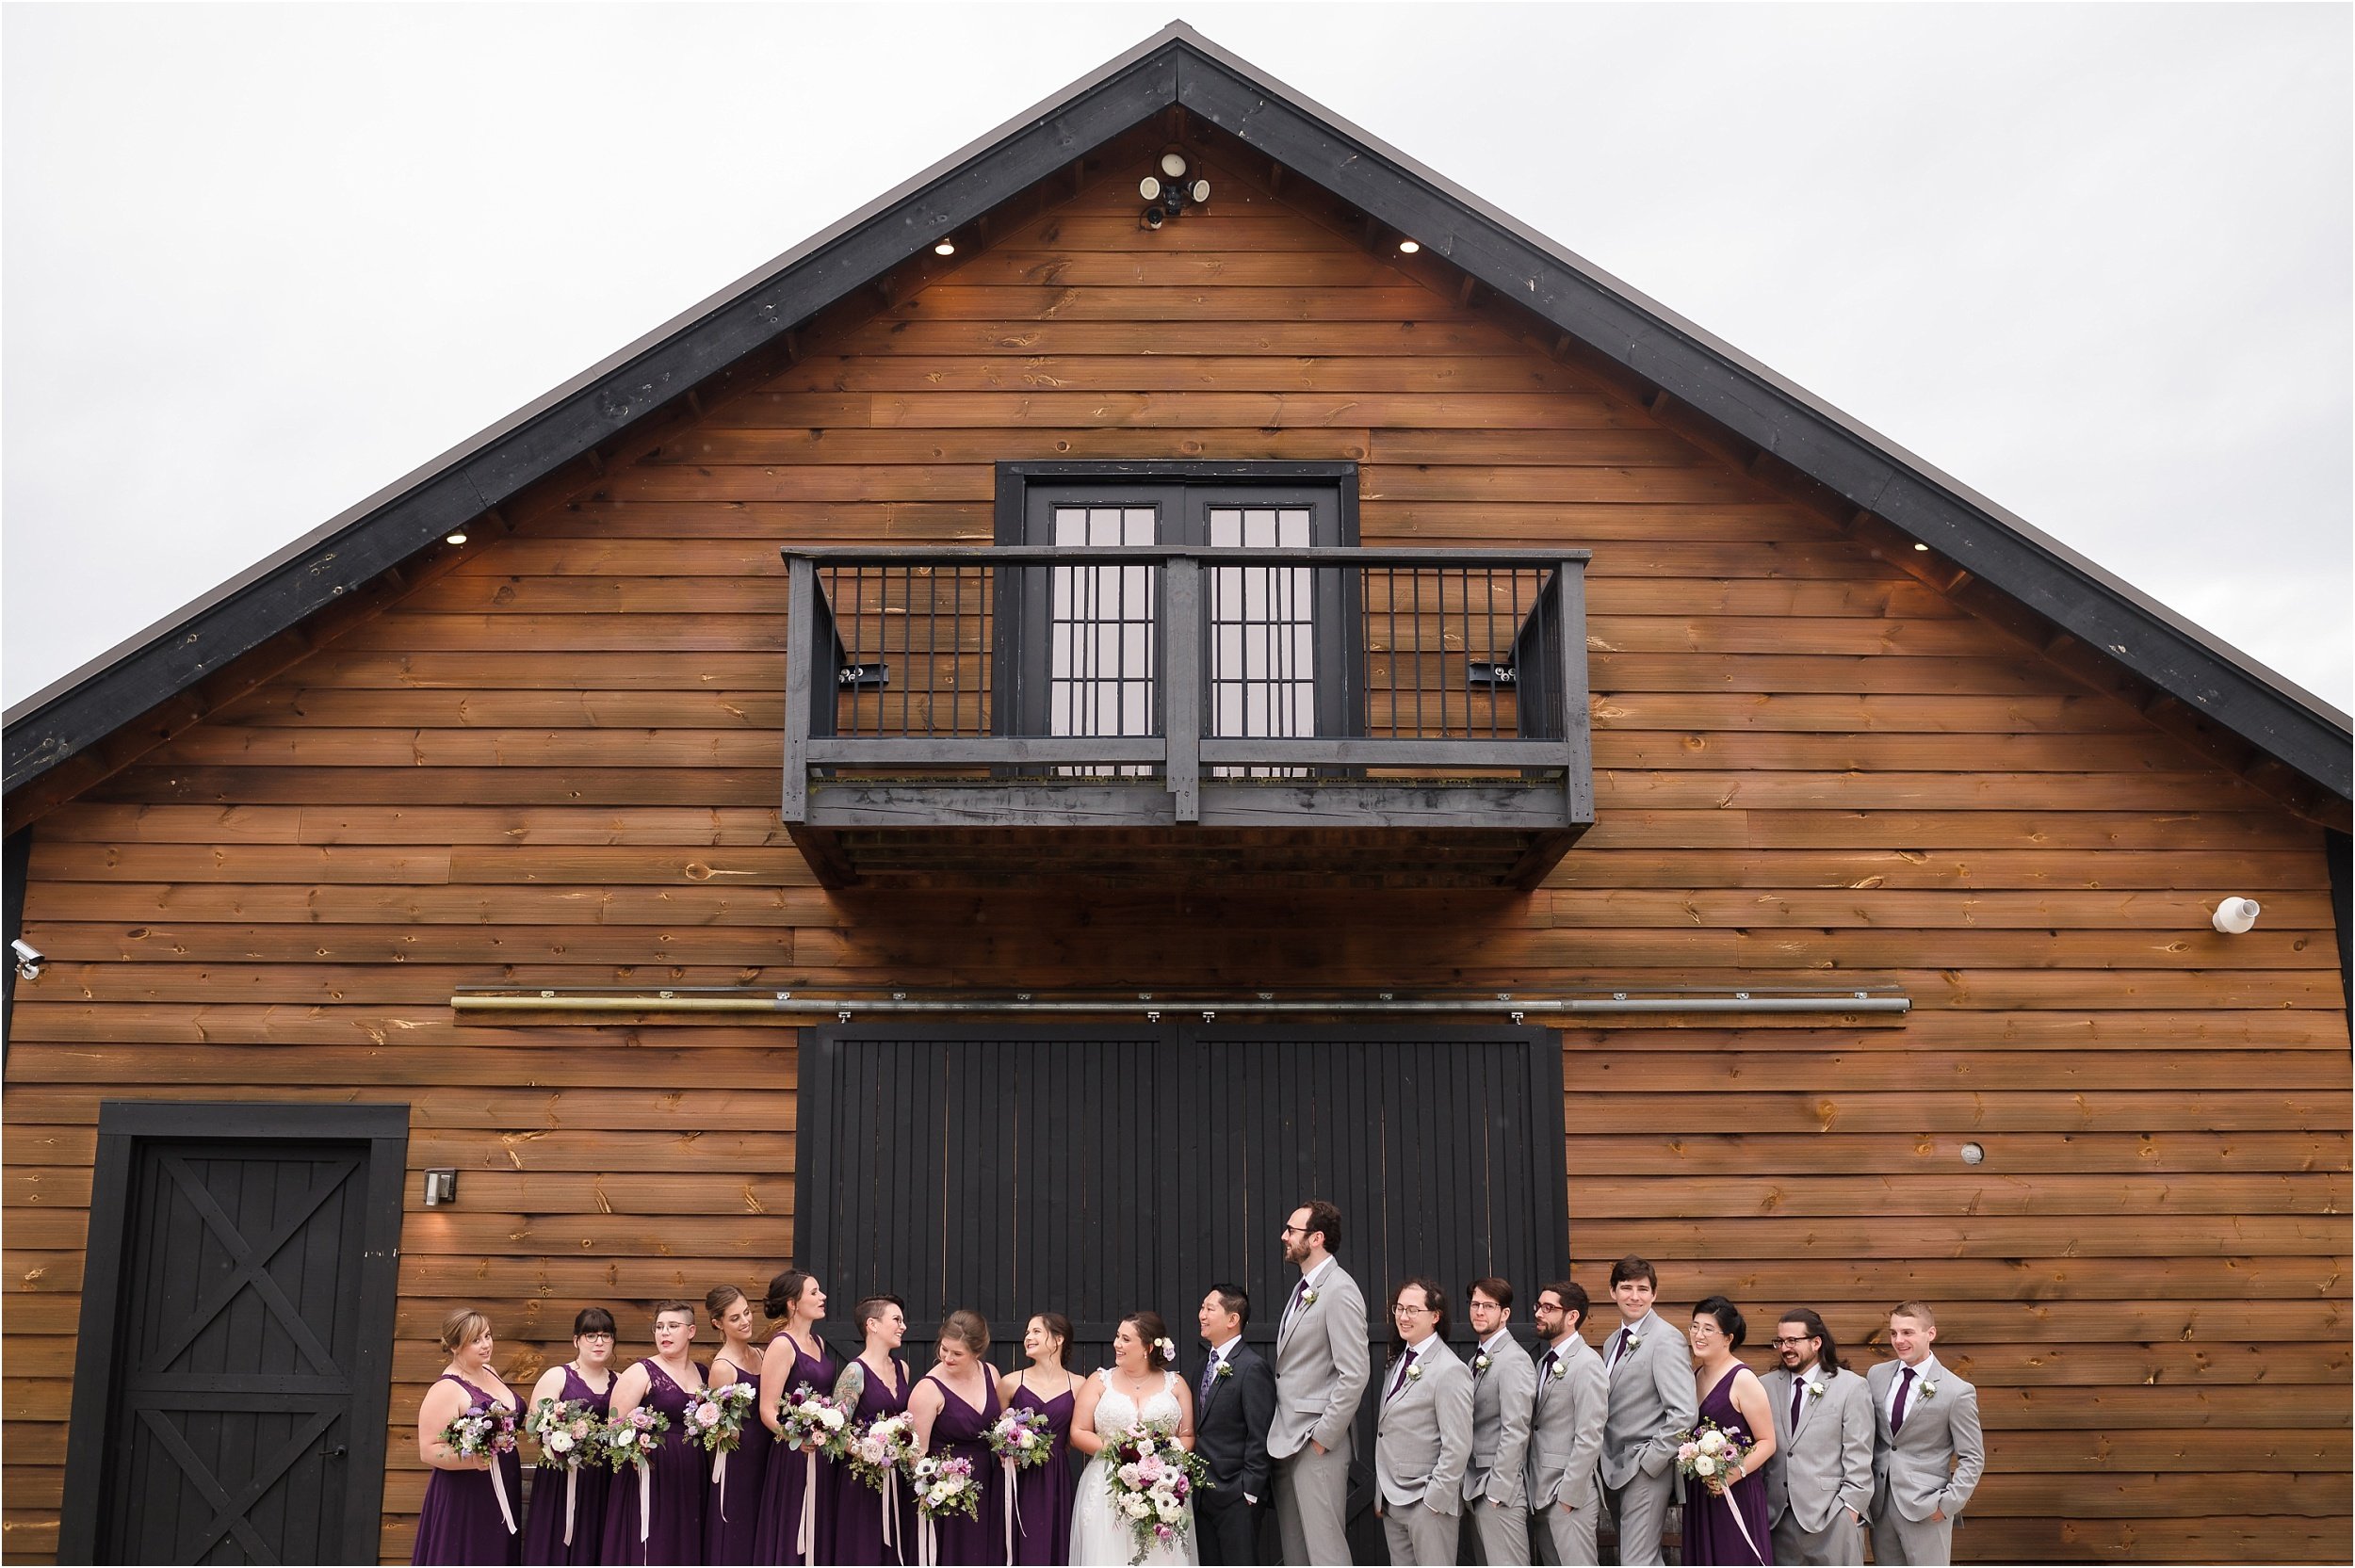  A large wedding party in front of The Pasture Barn at Robin Hills on a rainy day in Chelsea.  